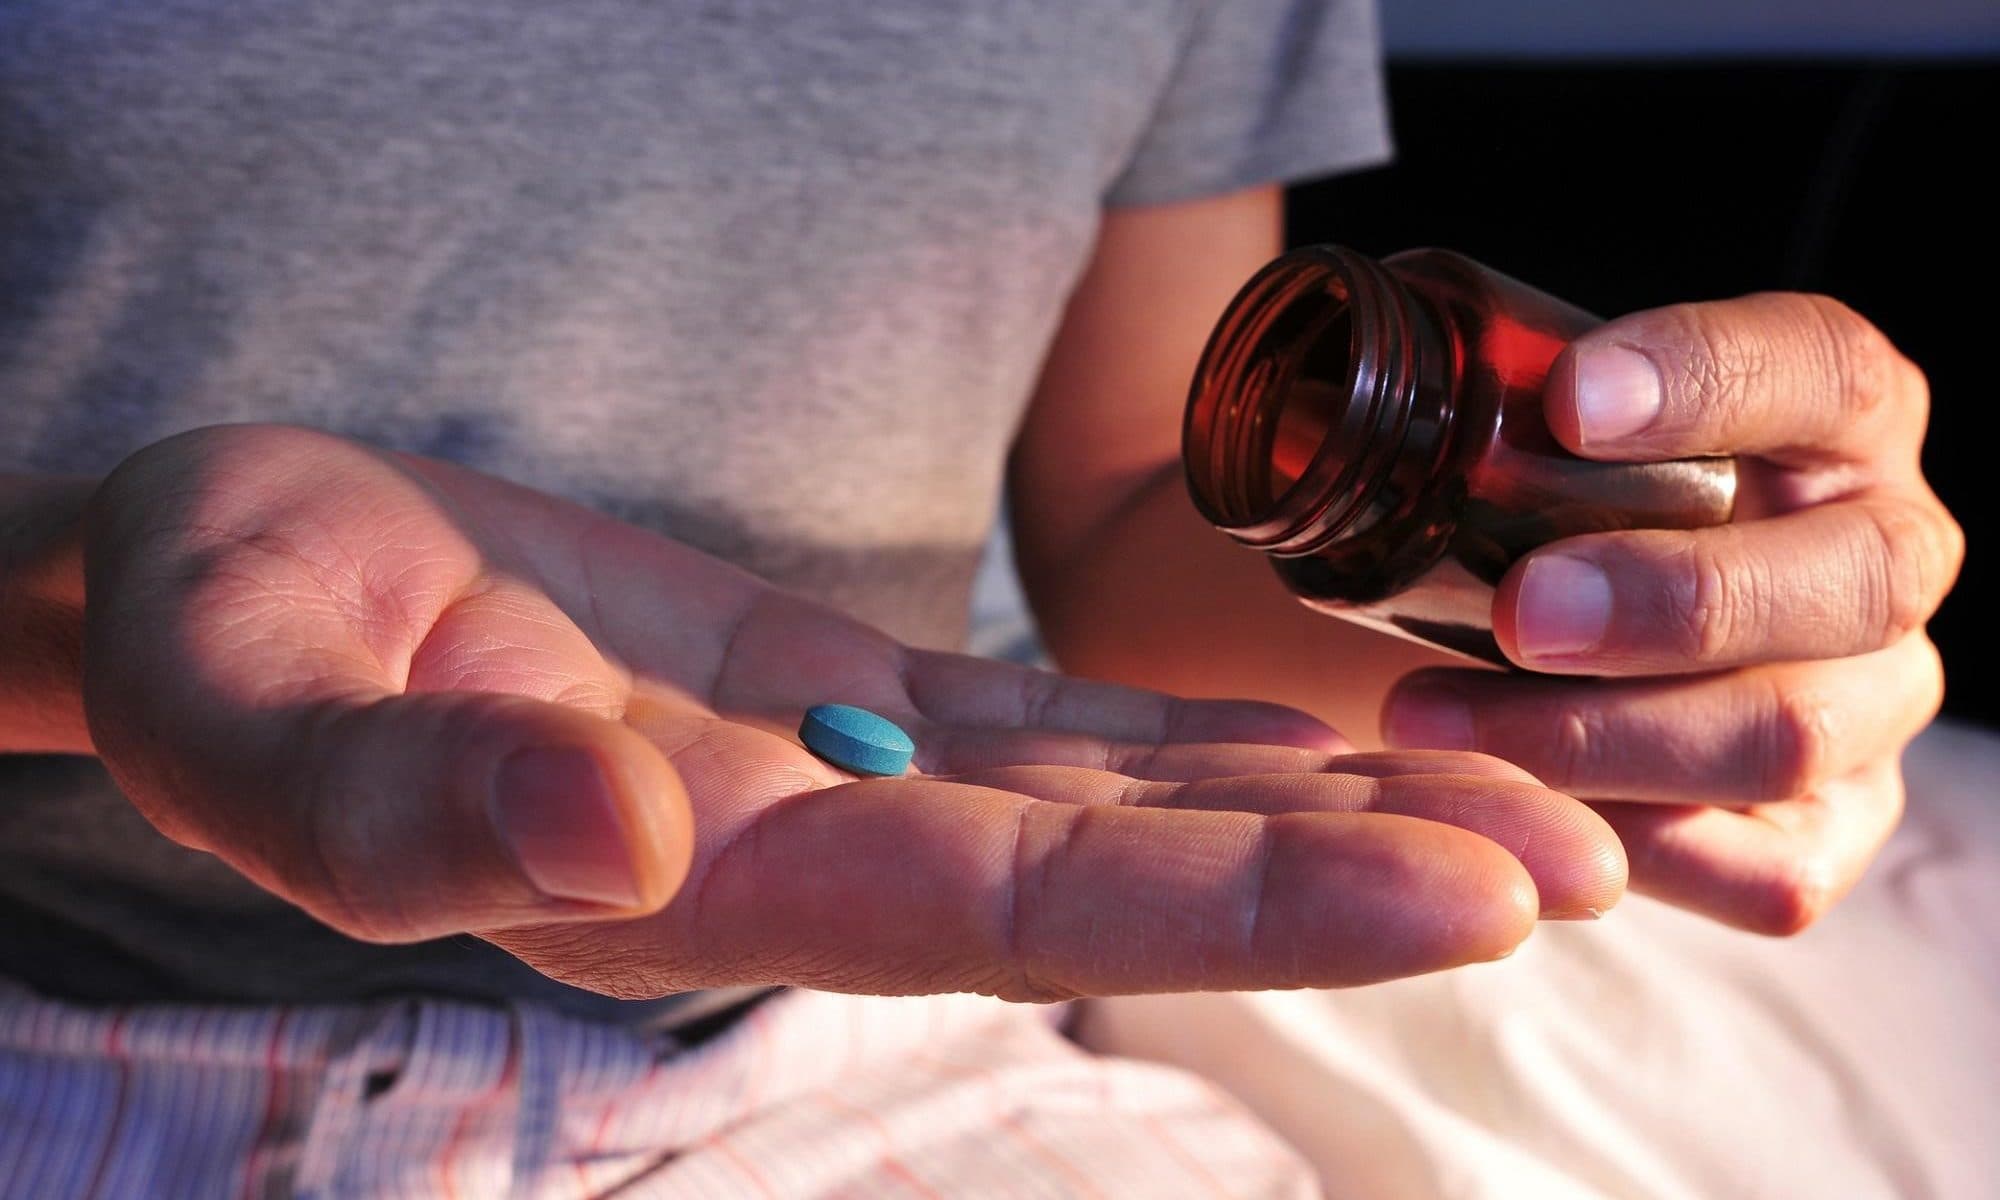 A man taking a blue tablet into his hand out of a medicine jar